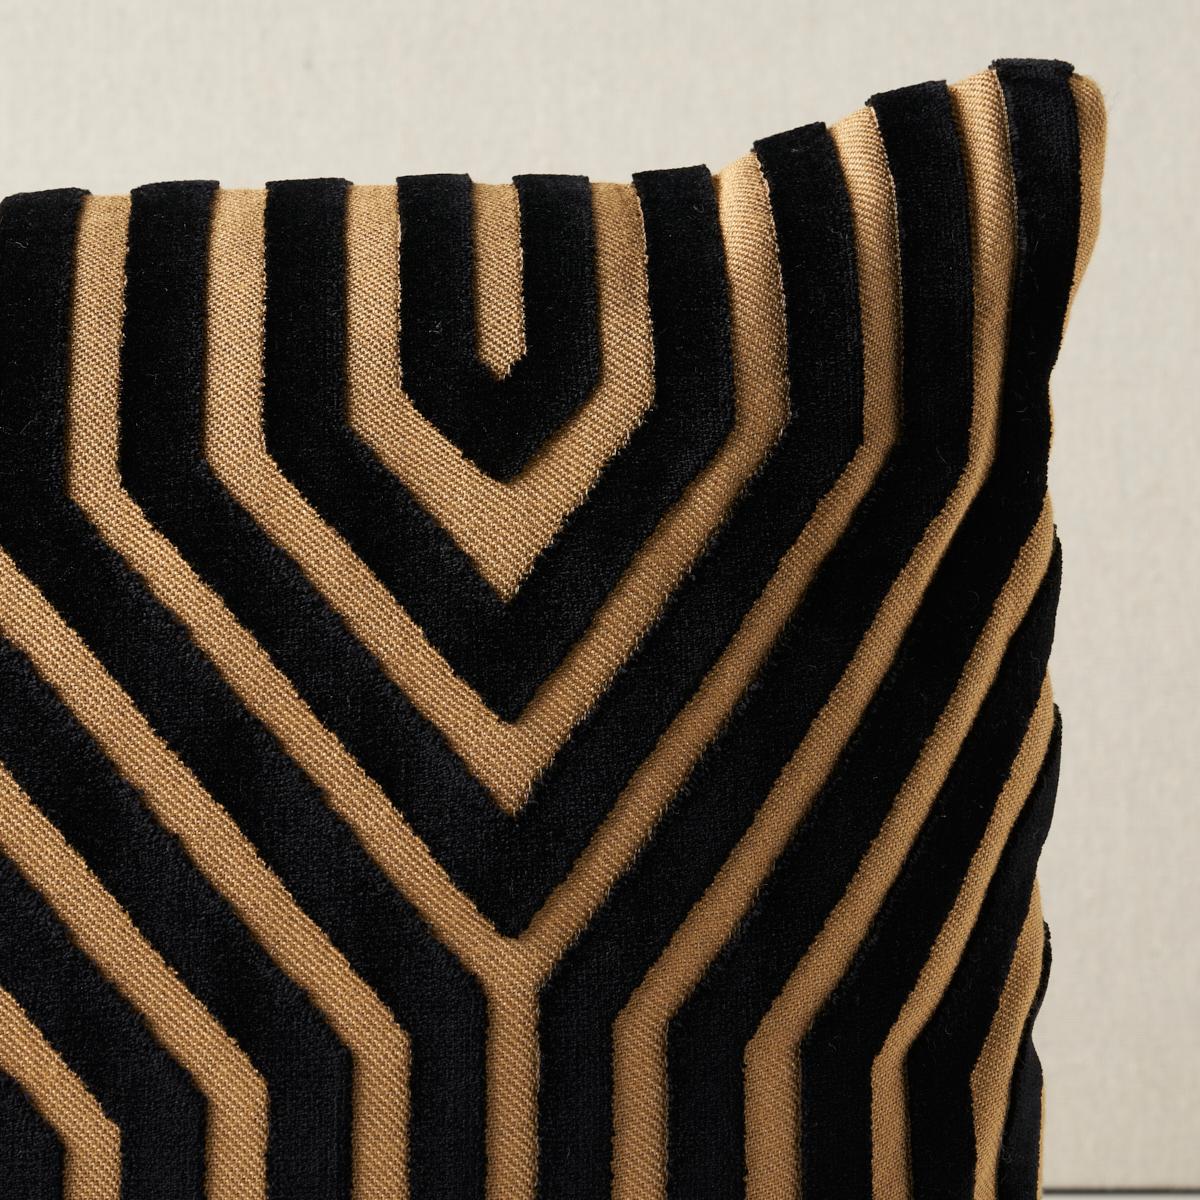 This pillow features Vanderbilt Velvet by Mary McDonald for Schumacher with a knife edge finish. A large-scale, linear design gives this Italian cut velvet fabric a graphic sensibility, while the silk-like pile adds extra dimension and a luxurious